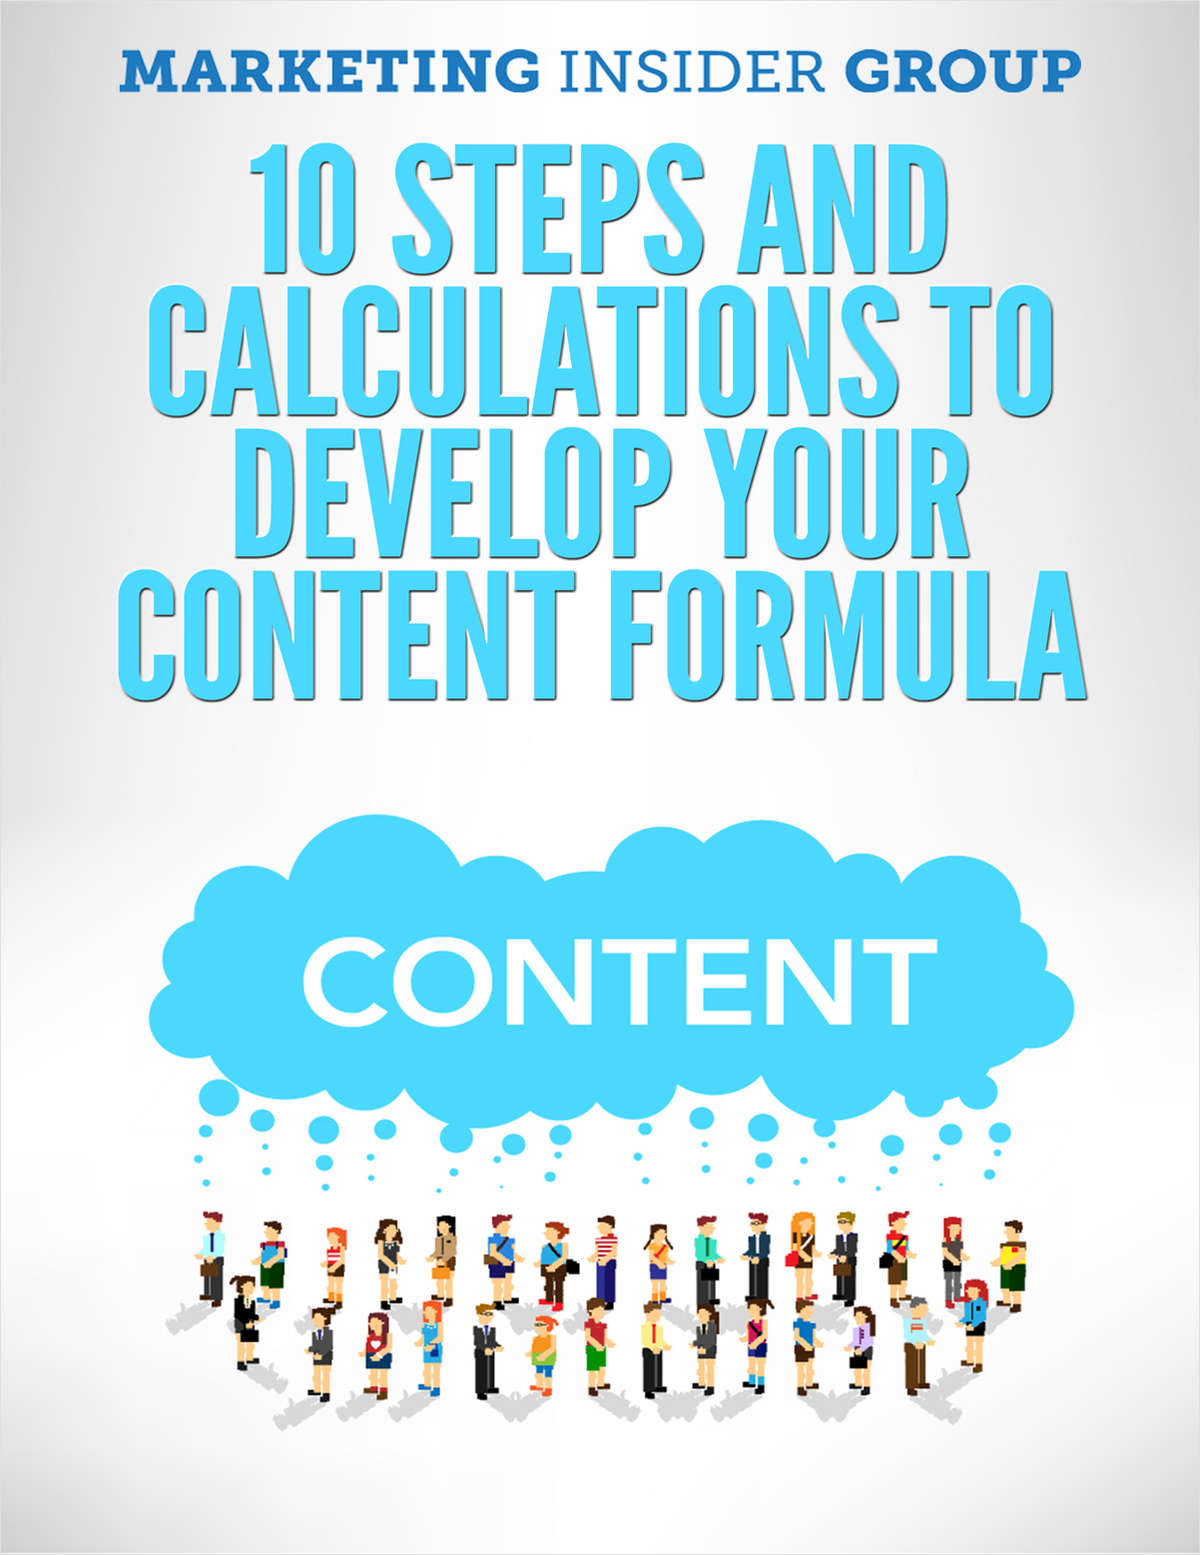 10 Steps and Calculations to Develop your Content Formula